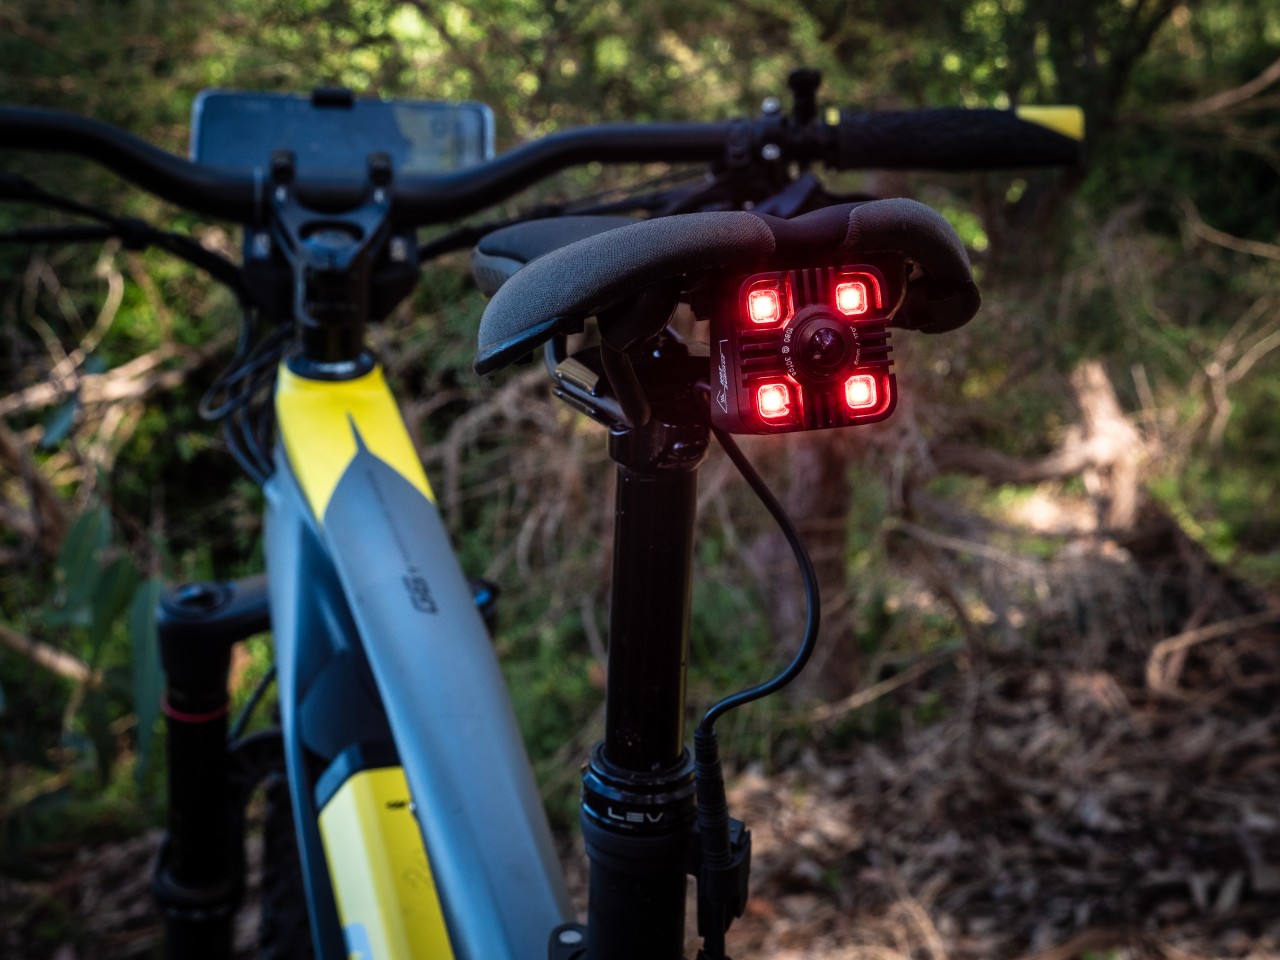 Rear view camera and integrated tail light – sits right where you want to pick the bike up by the seat